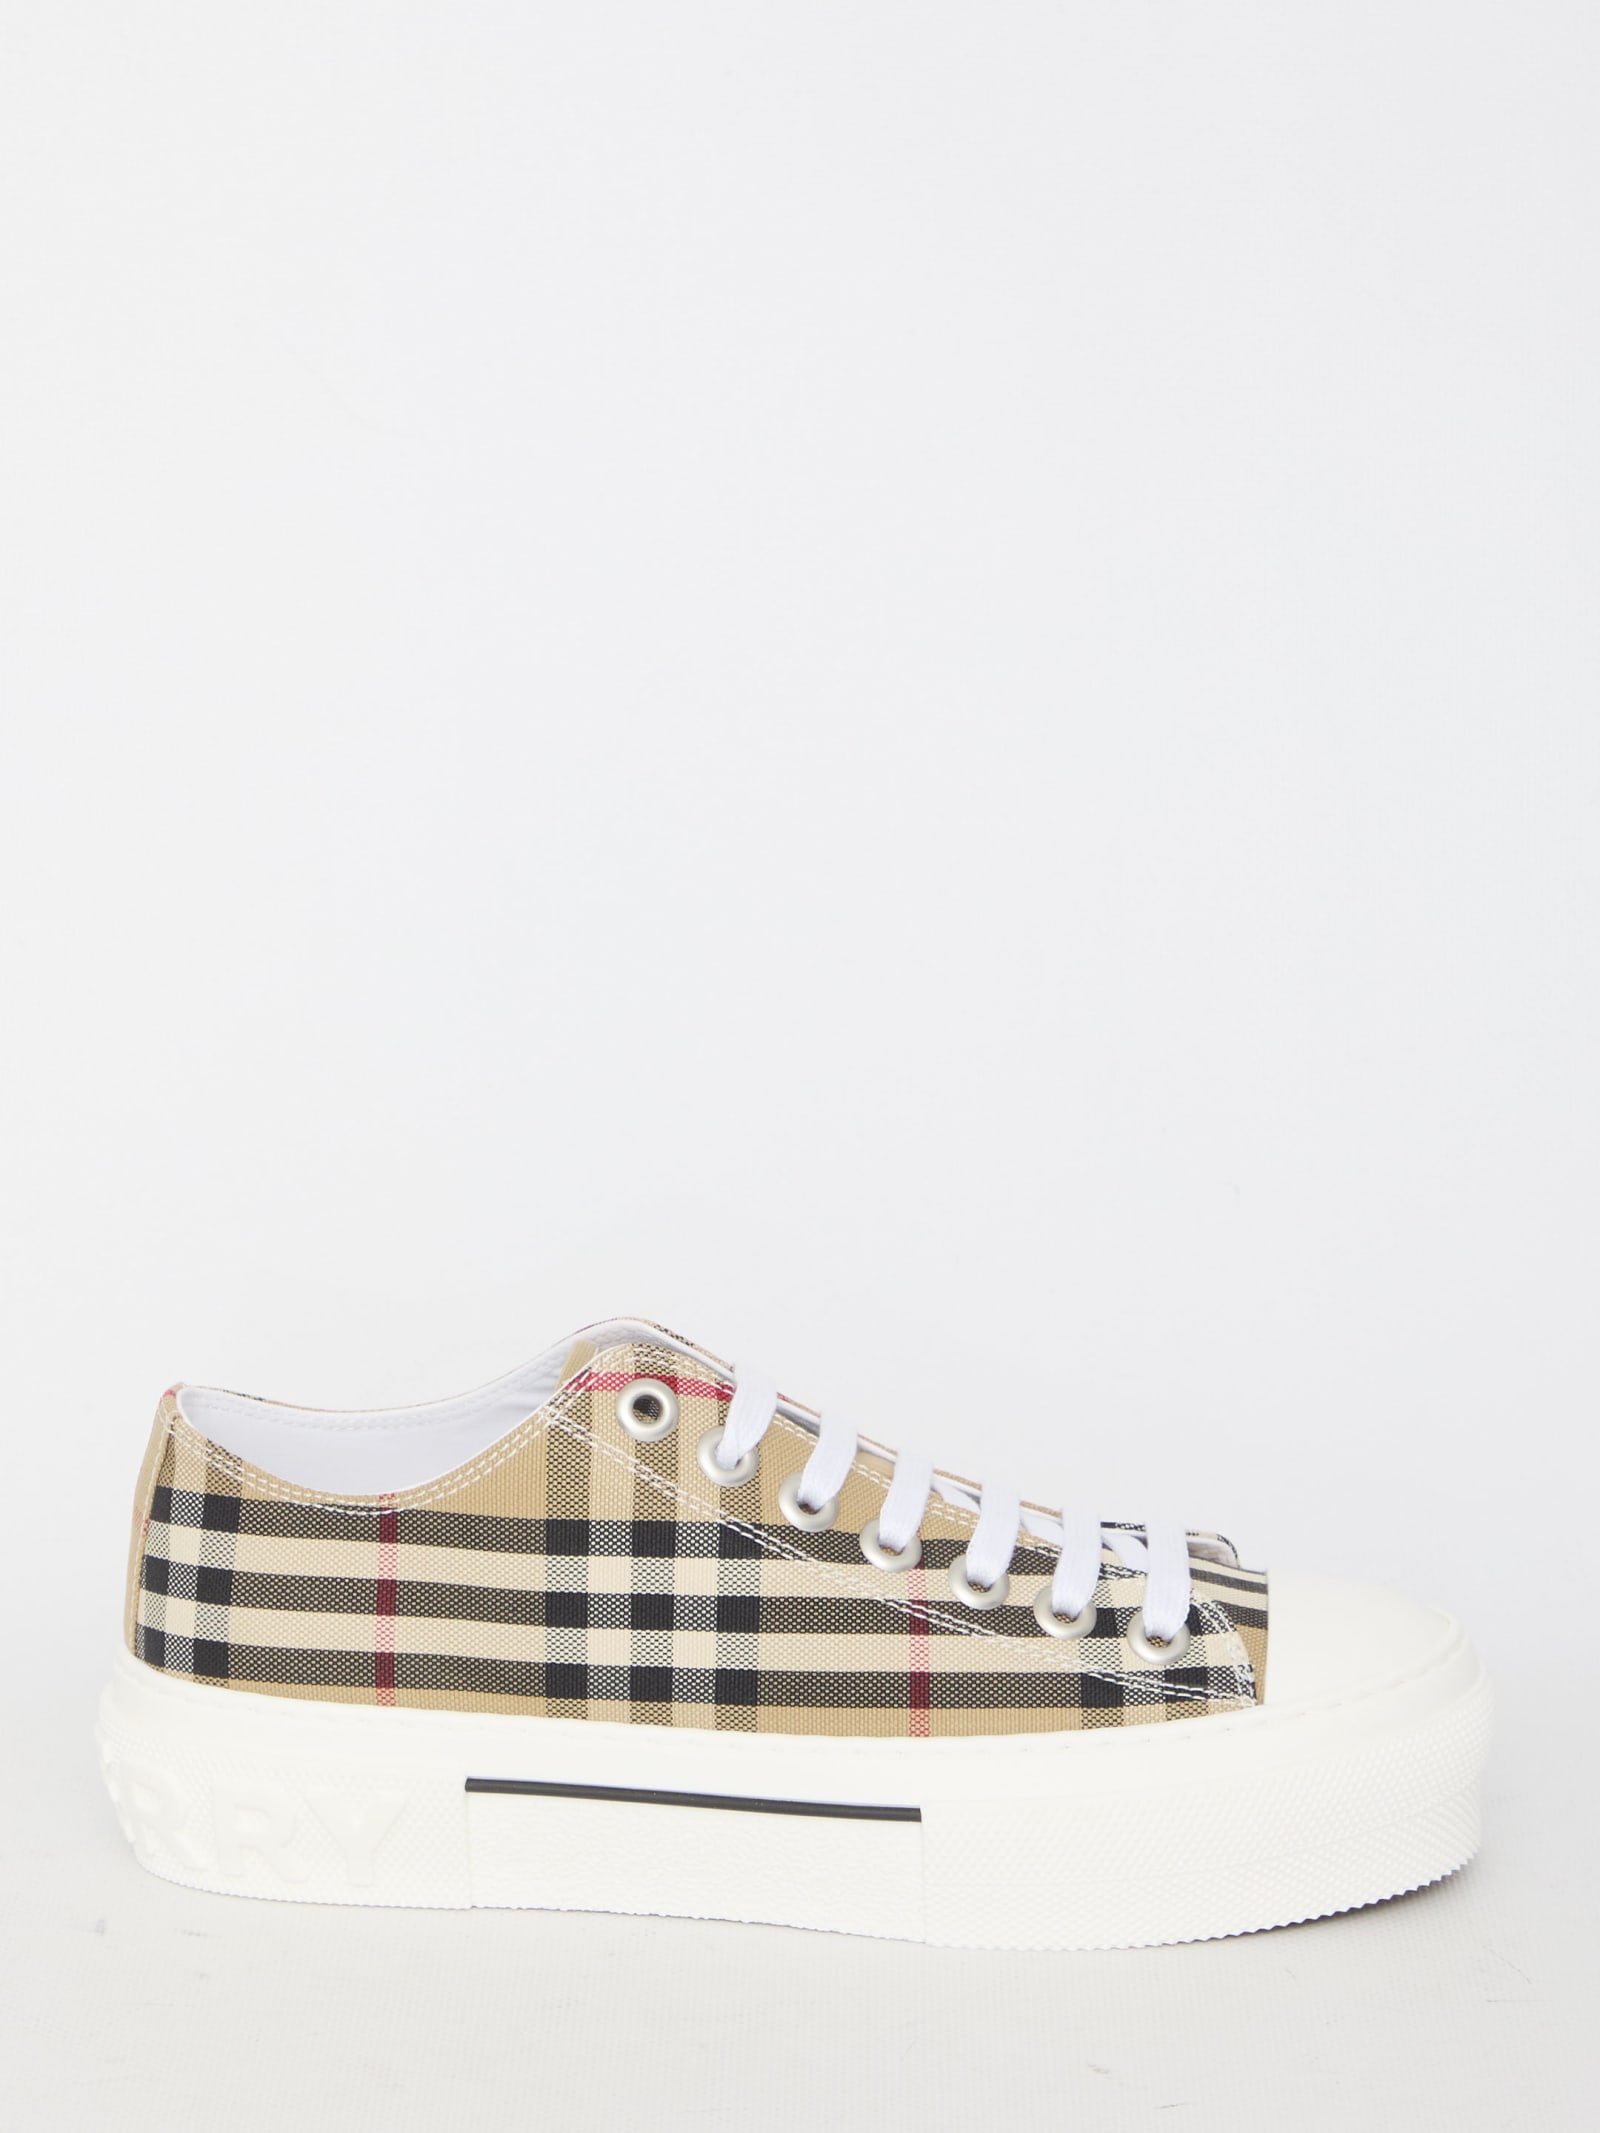 BURBERRY LOW TOP CHECK SNEAKERS